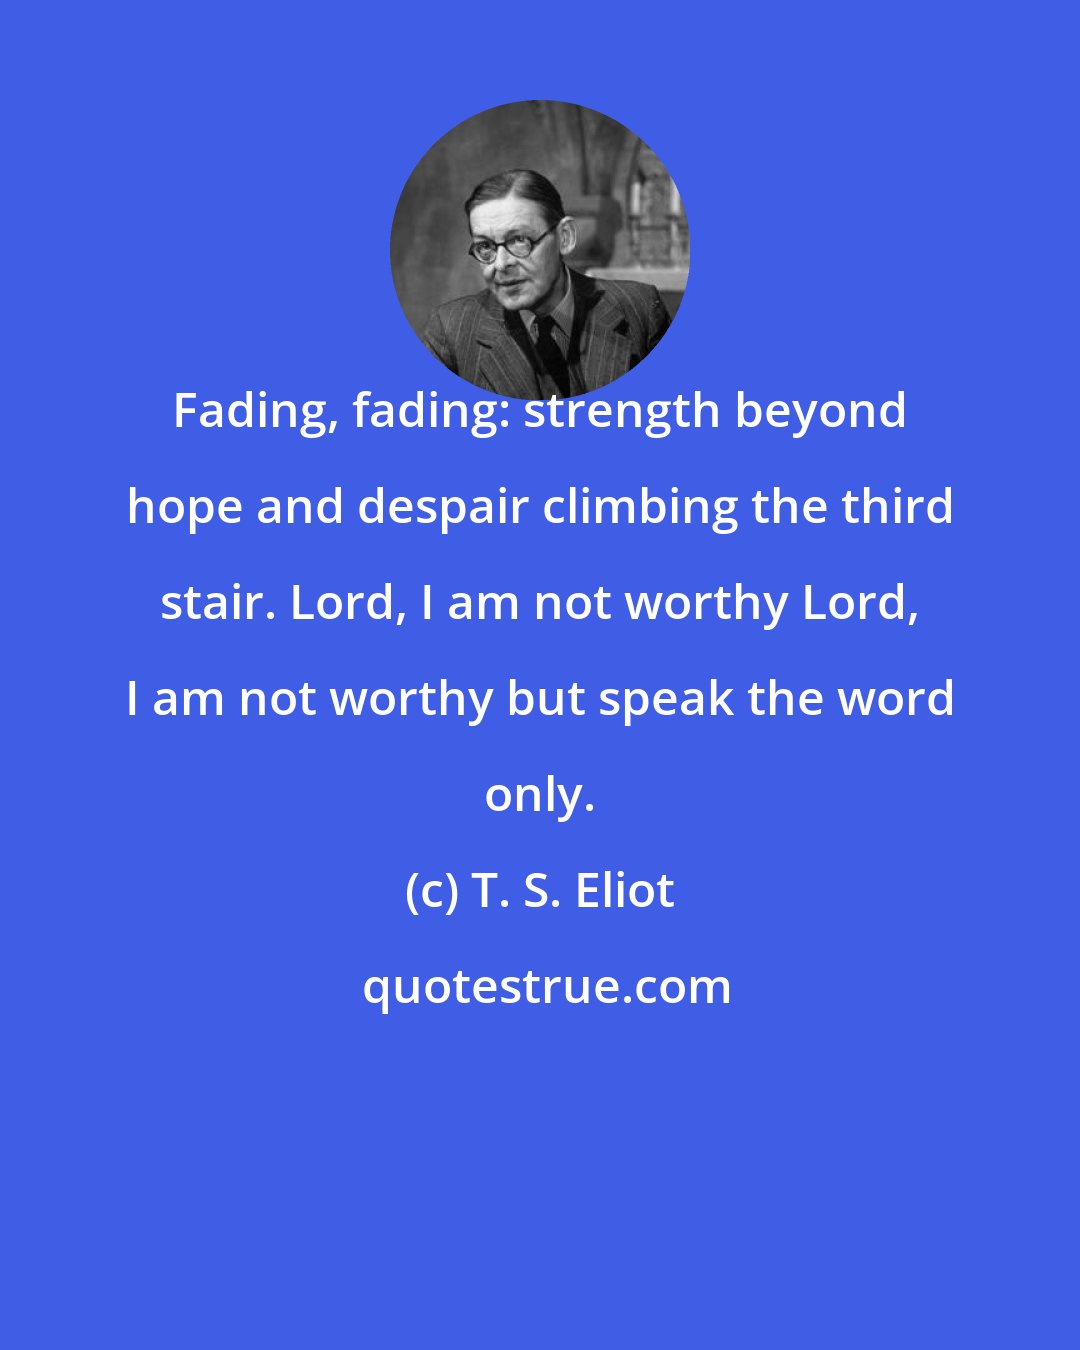 T. S. Eliot: Fading, fading: strength beyond hope and despair climbing the third stair. Lord, I am not worthy Lord, I am not worthy but speak the word only.